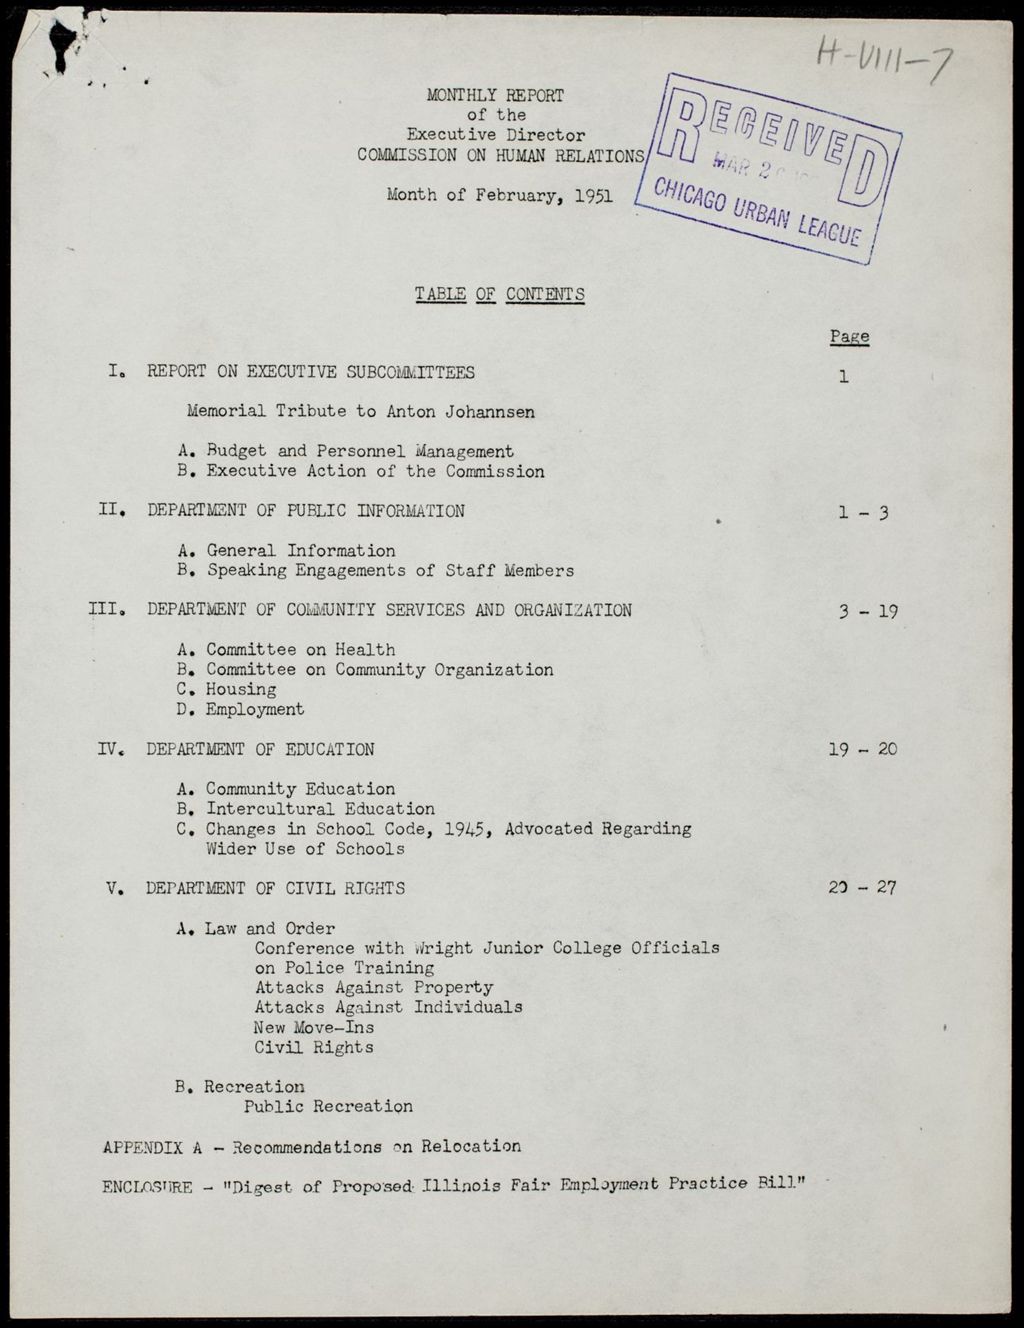 Miniature of Chicago Commission on Human Relations Executive Director reports, 1951 (Folder I-2791)